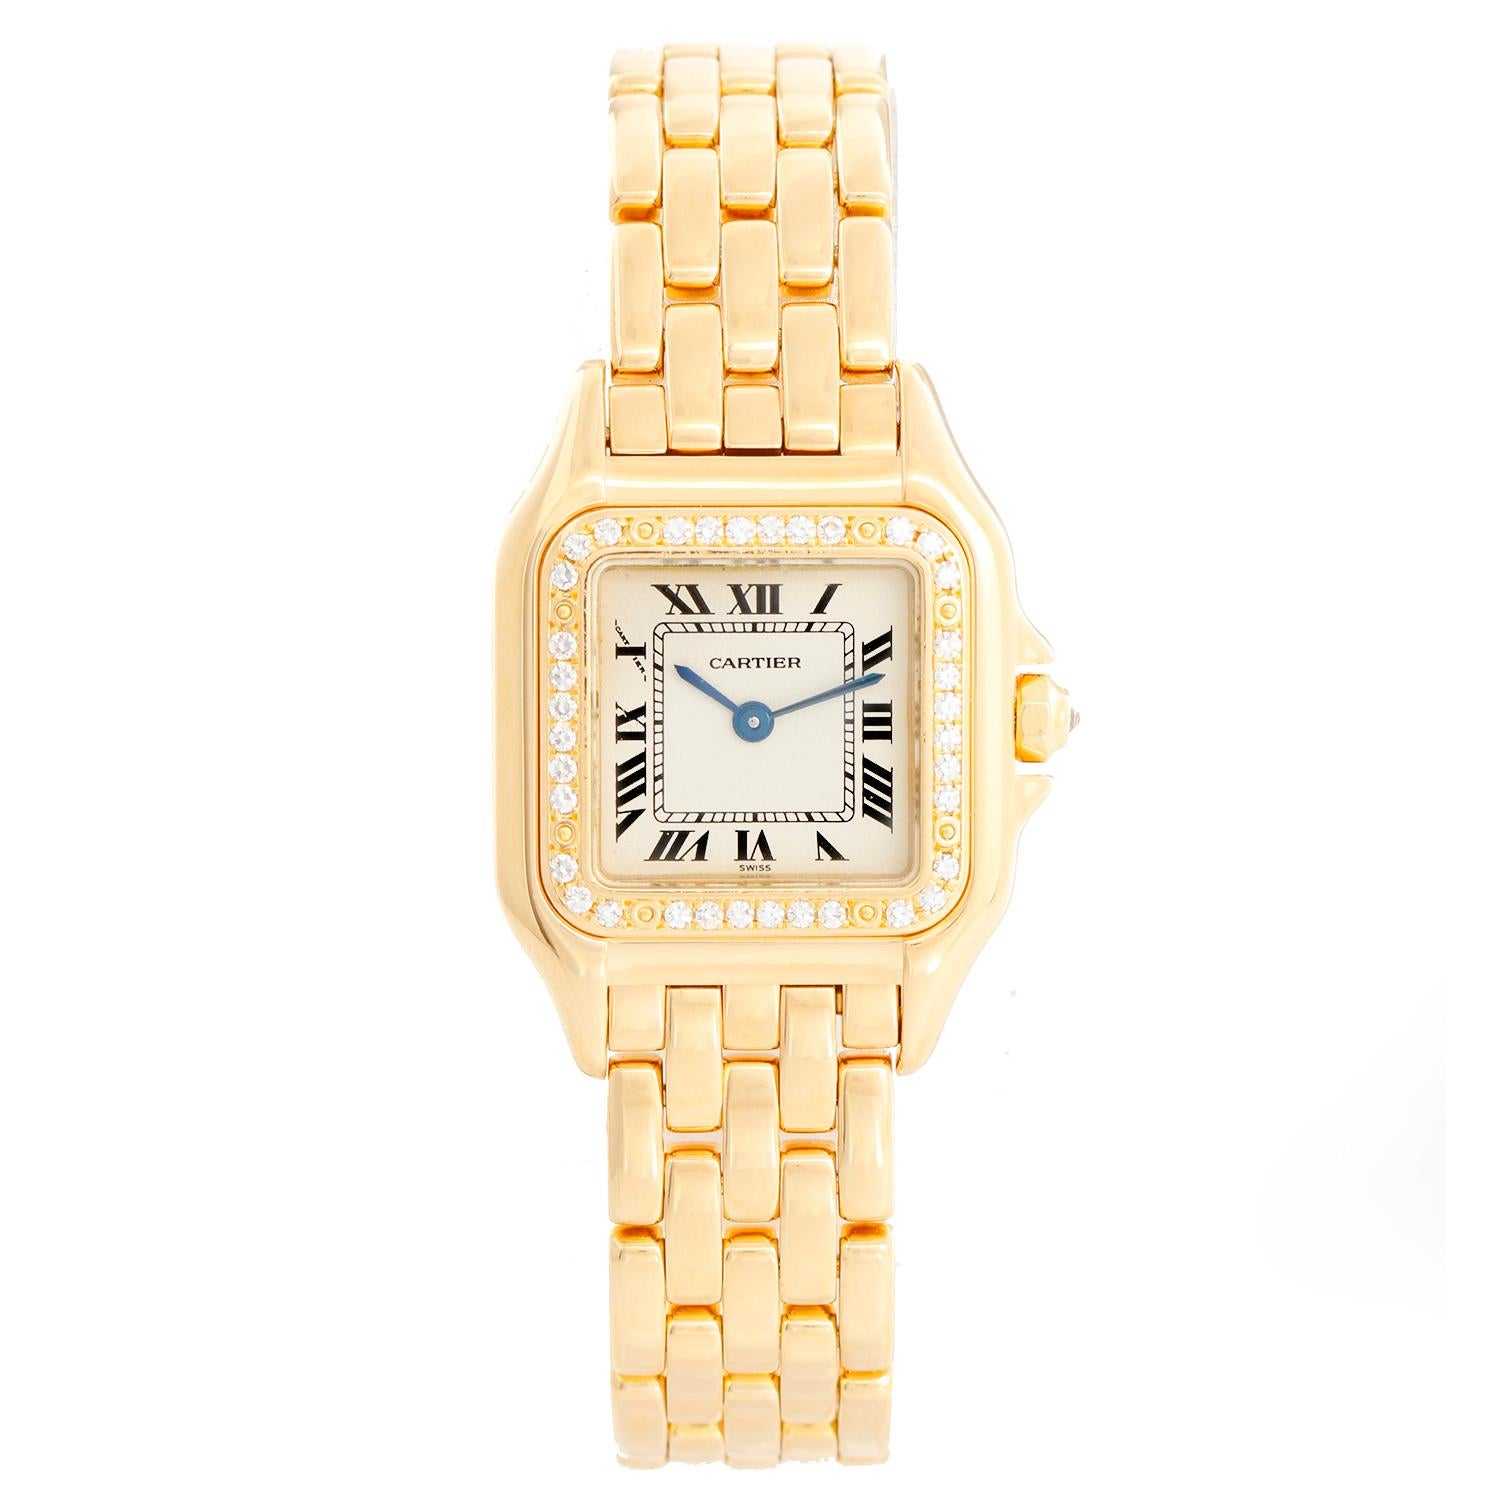 Cartier 18K Yellow Gold Panther Ladies Watch WF3254B9 1280 - Quartz. 18K Yellow Gold with diamonds (30 x 21 mm) ; Factory diamond bezel. Ivory dial with black Roman numerals. 18K Yellow Gold Panther bracelet with deployant buckle. Pre-owned with